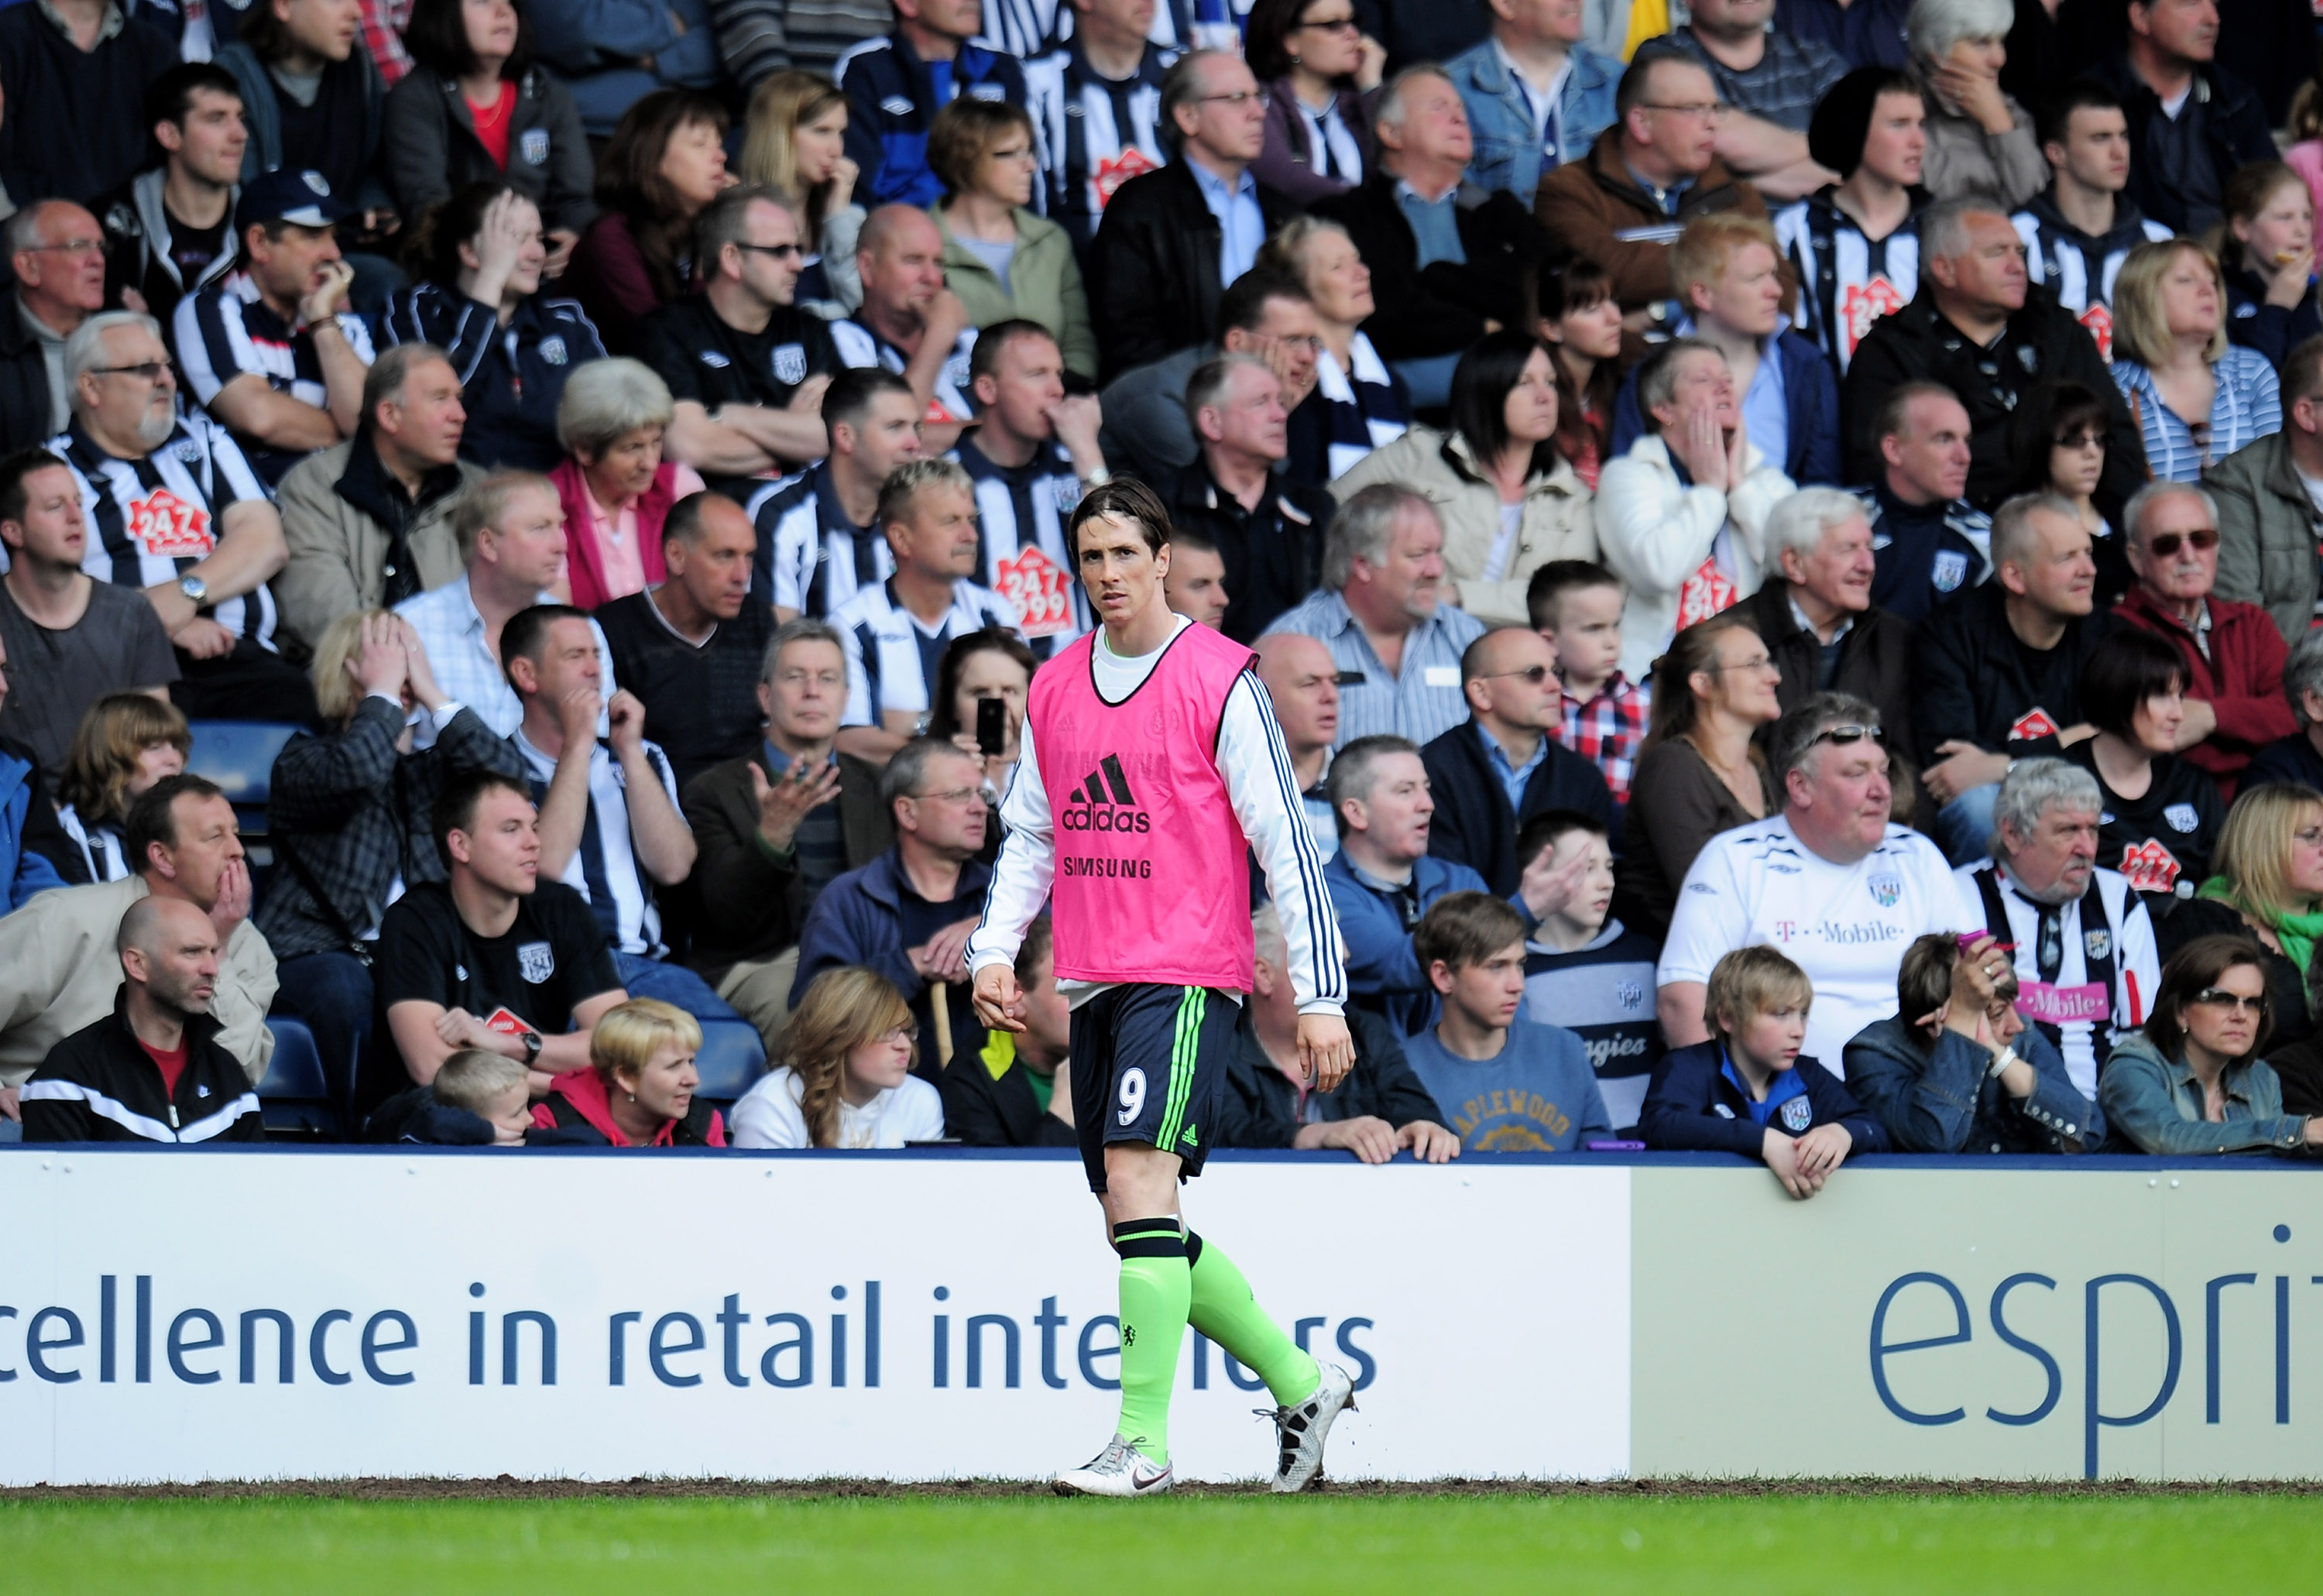 WEST BROMWICH, ENGLAND - APRIL 16:  Fernando Torres of Chelsea warms up during the Barclays Premier League match between West Bromich Albion and Chelsea at The Hawthorns on April 16, 2011 in West Bromwich, England.  (Photo by Shaun Botterill/Getty Images)